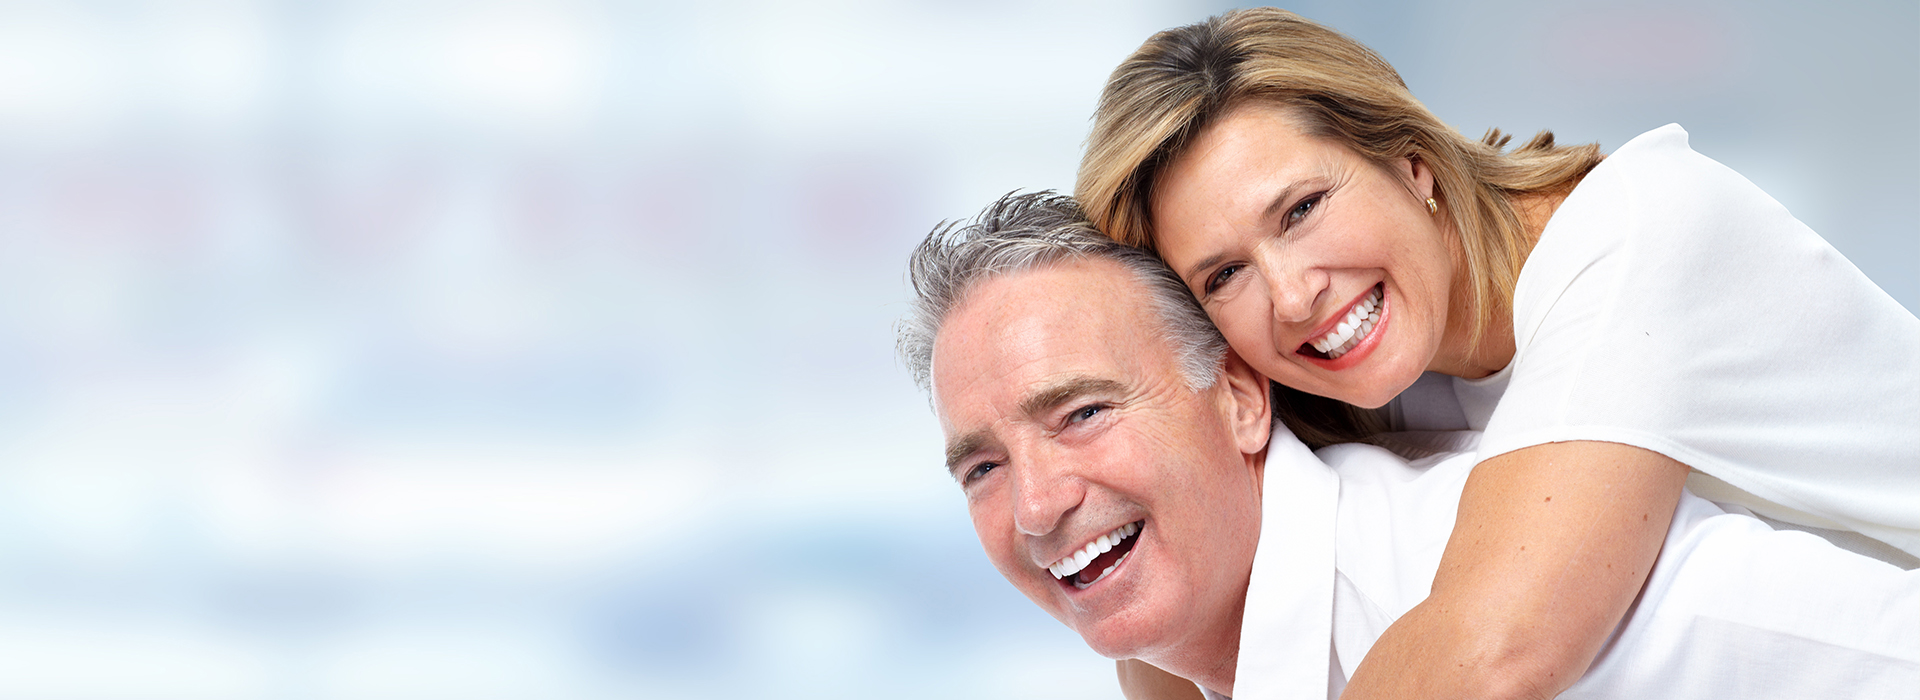 The image is a photograph of two older adults, a man and a woman, smiling and embracing each other. They appear to be happy and are dressed in casual attire. The background is blurred but suggests an indoor setting with warm lighting.